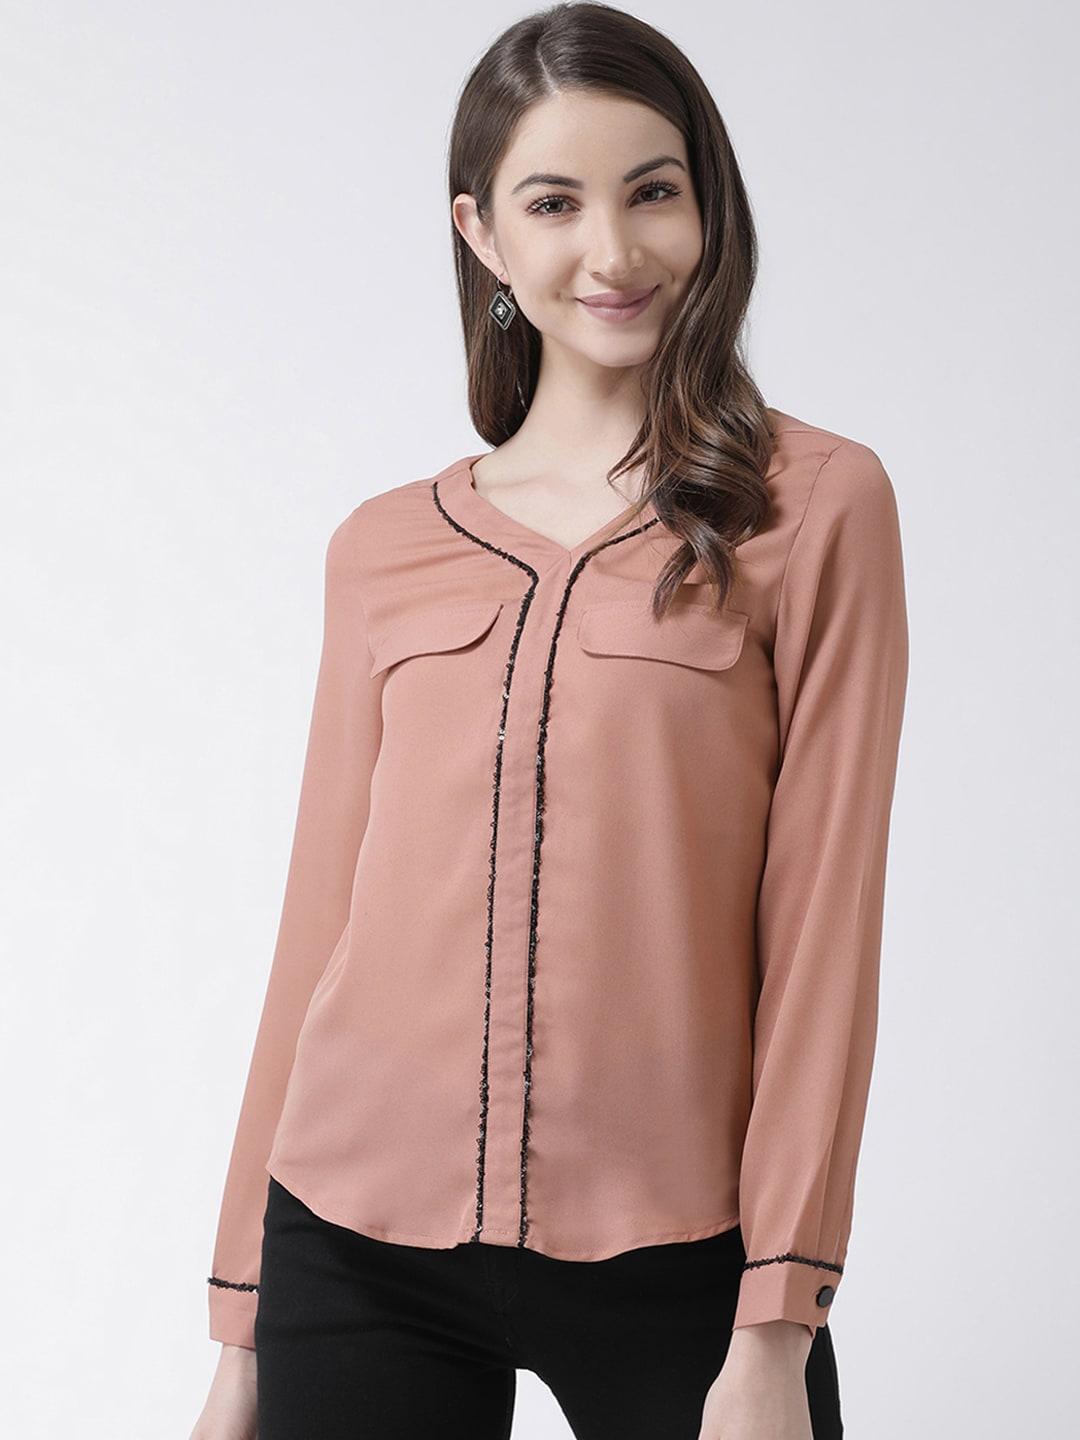 KASSUALLY Women Pink Regular Fit Solid Casual Shirt